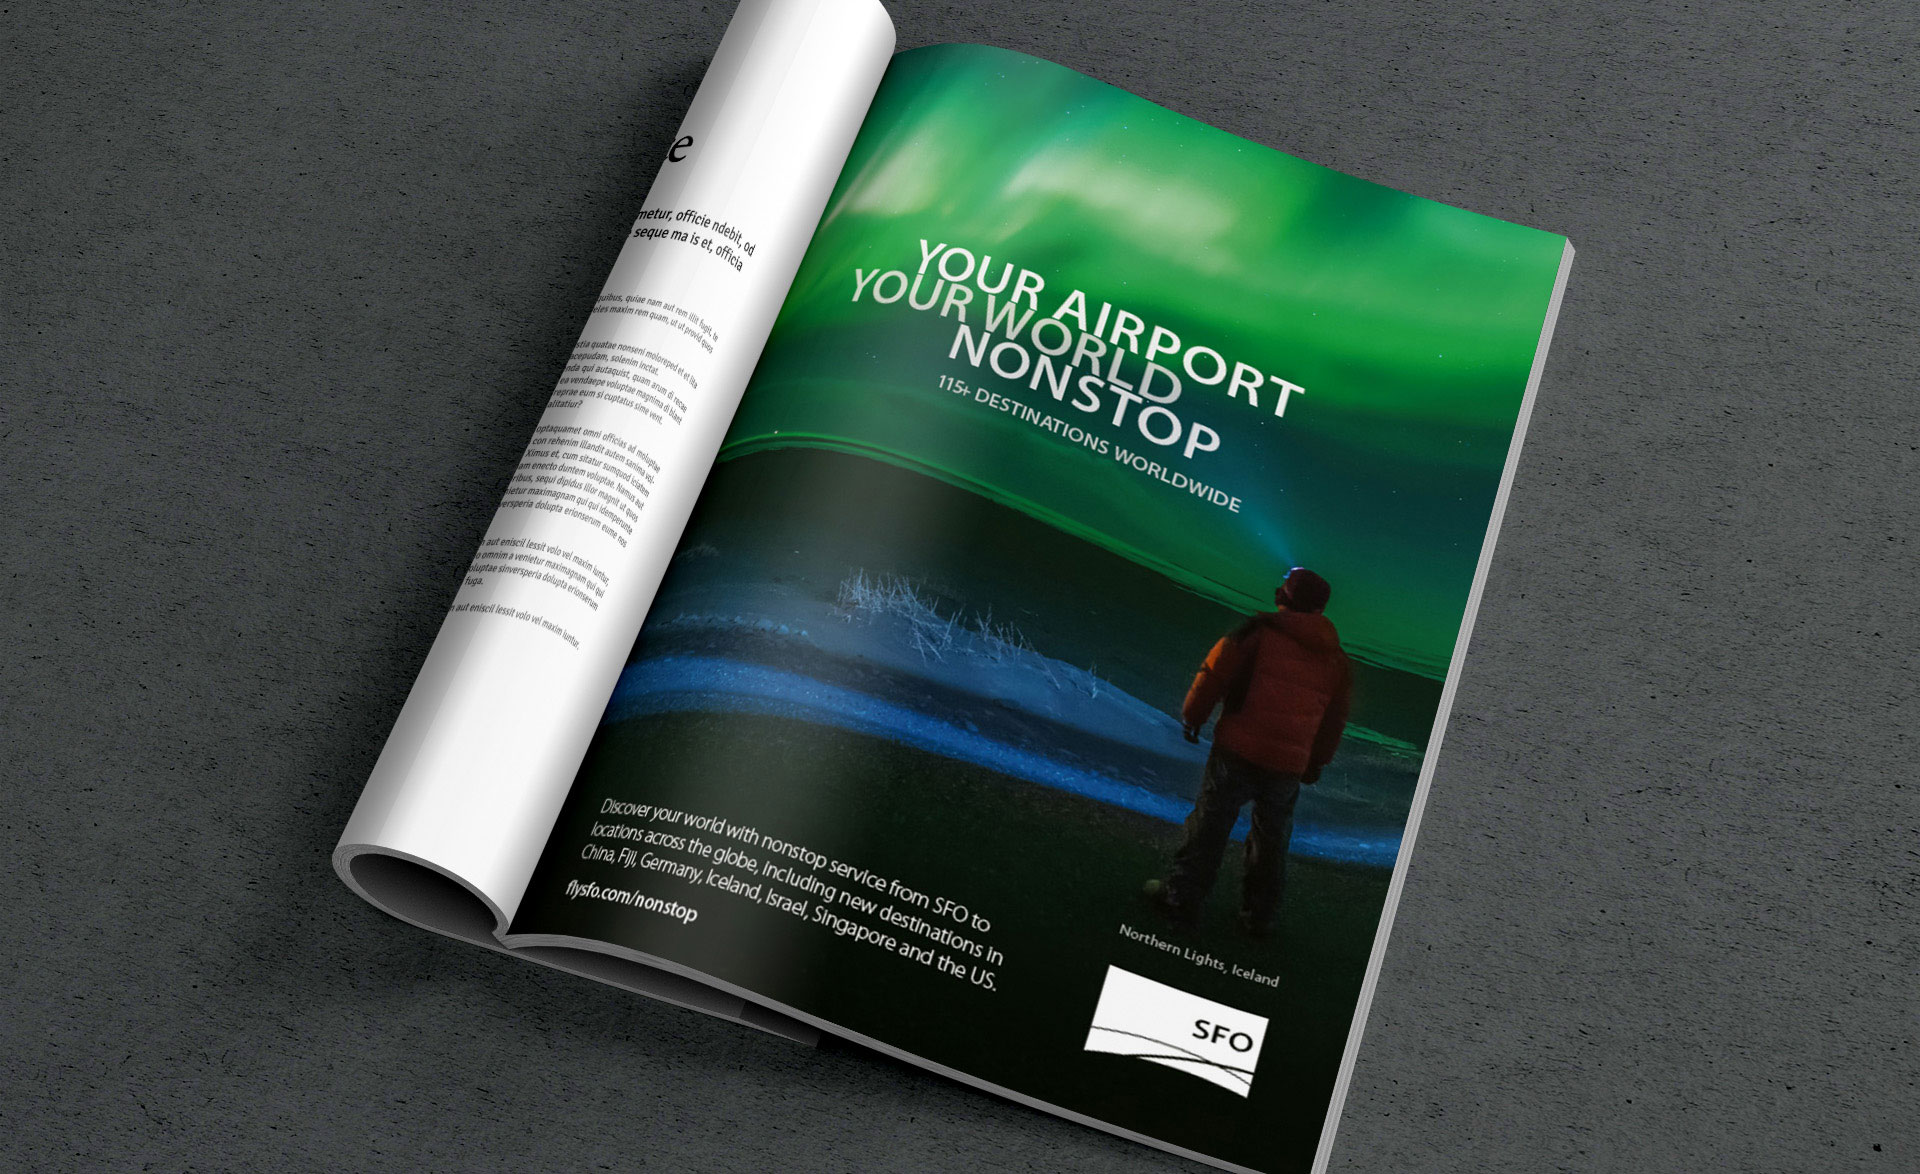 Print Ad: Your Airport. Your World. Nonstop. 115+ Destinations Worldwide.